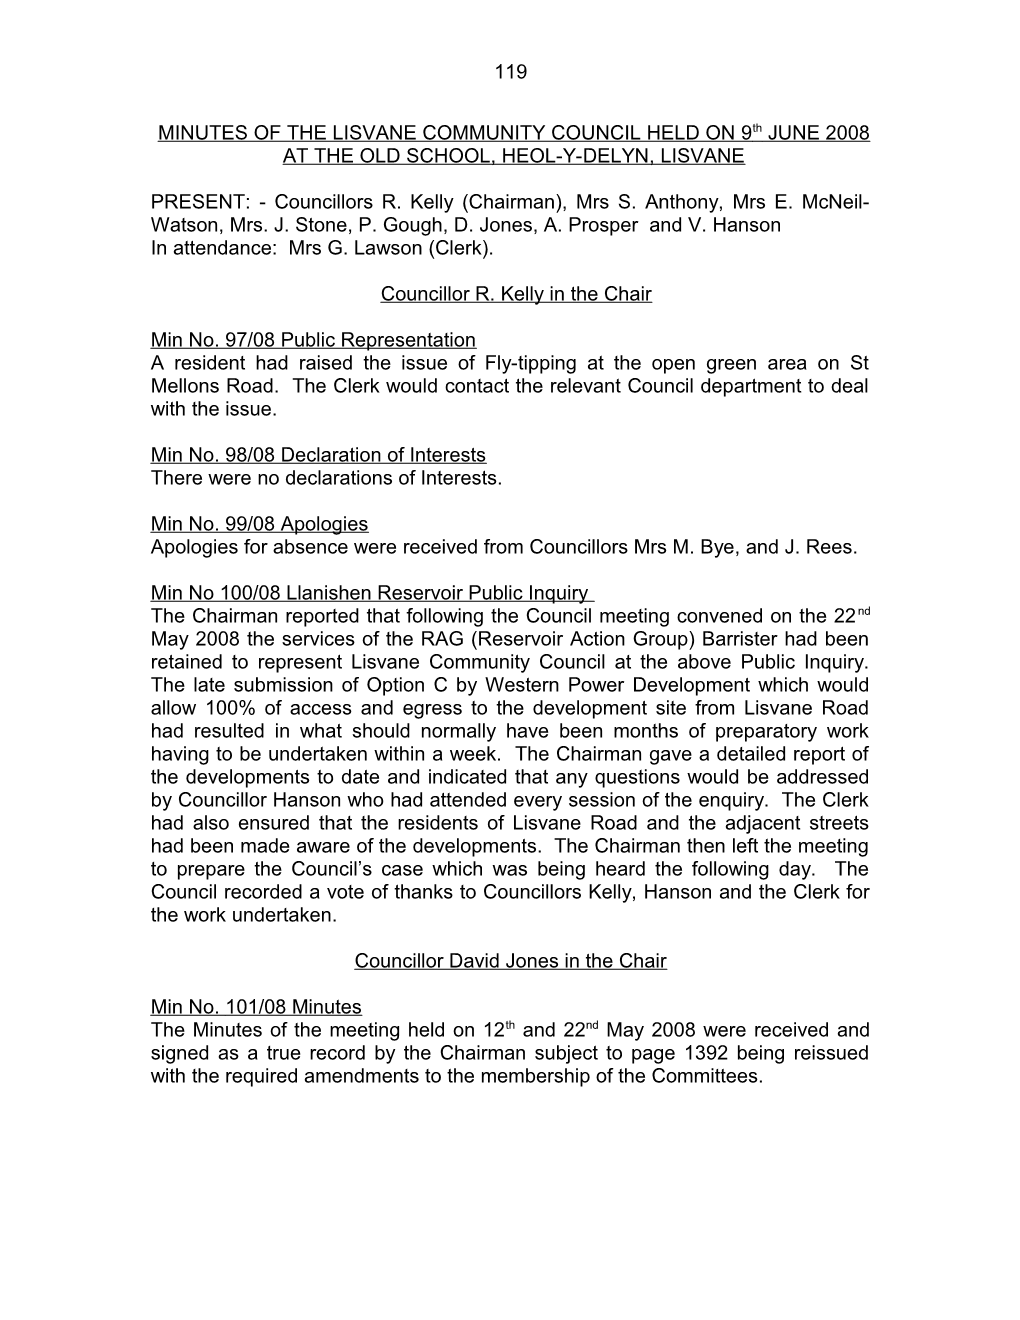 MINUTES of the LISVANE COMMUNITY COUNCIL HELD on 12Th MAY 2008 at the OLD SCHOOL, HEOL-Y-DELYN